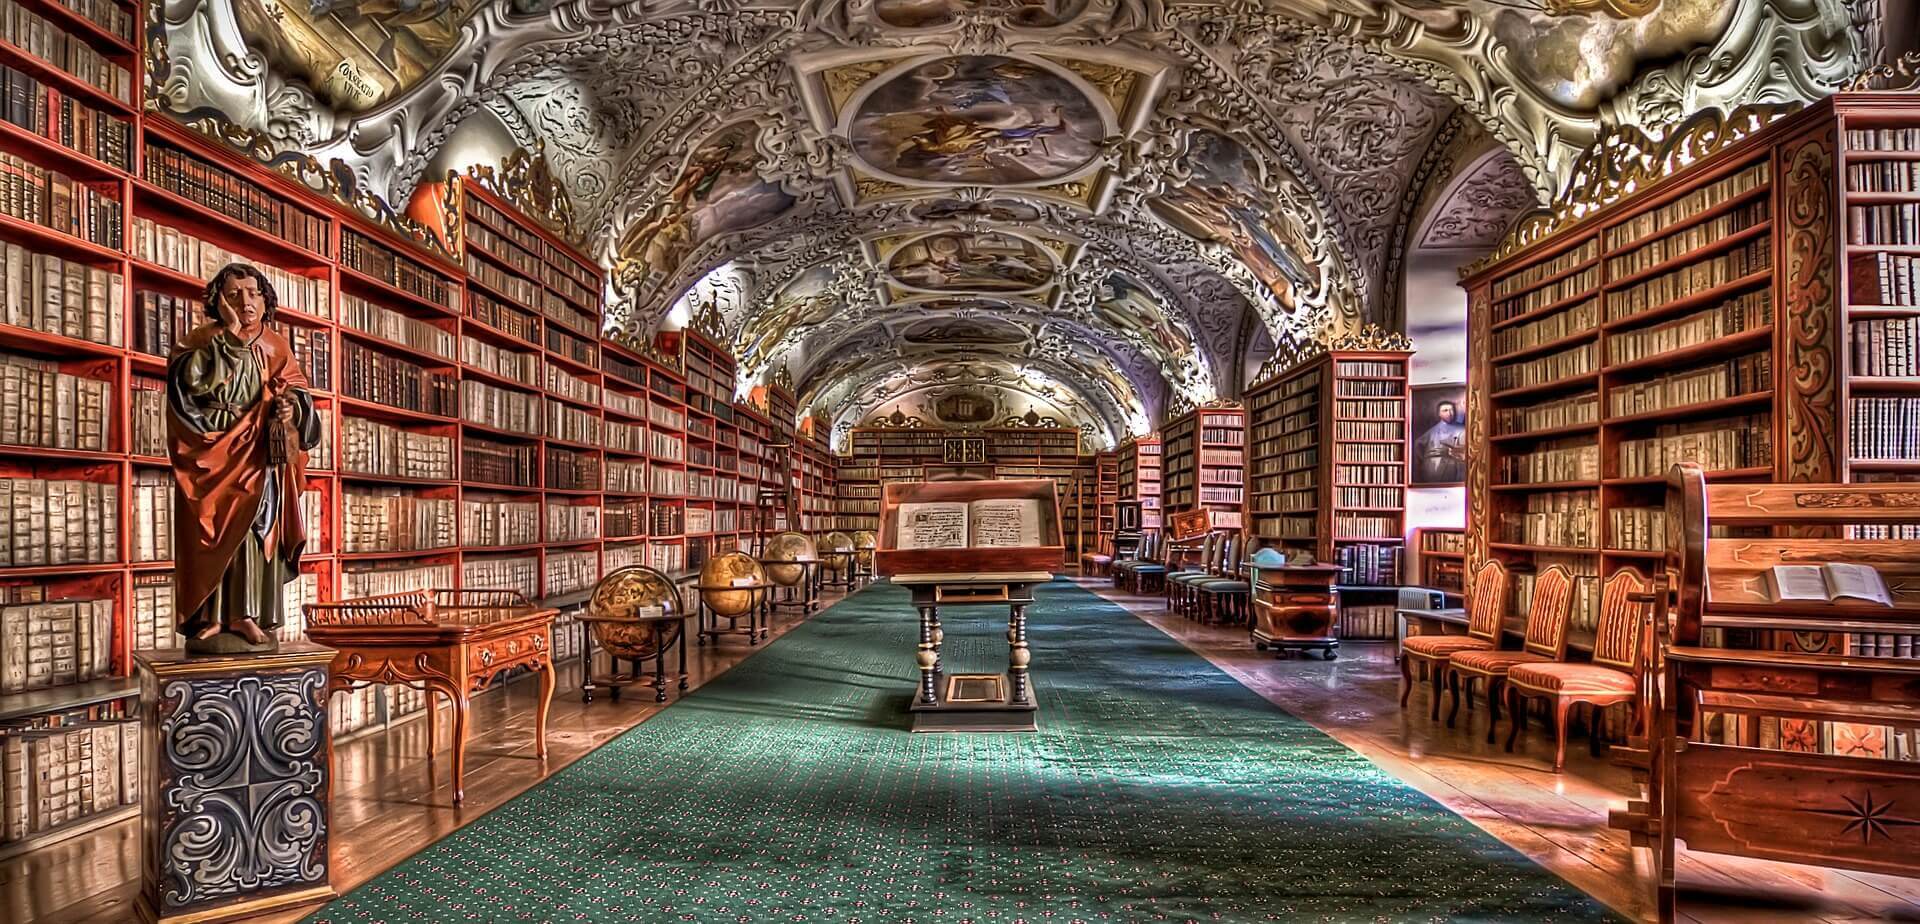 Image of a massive library with enormous literature resources